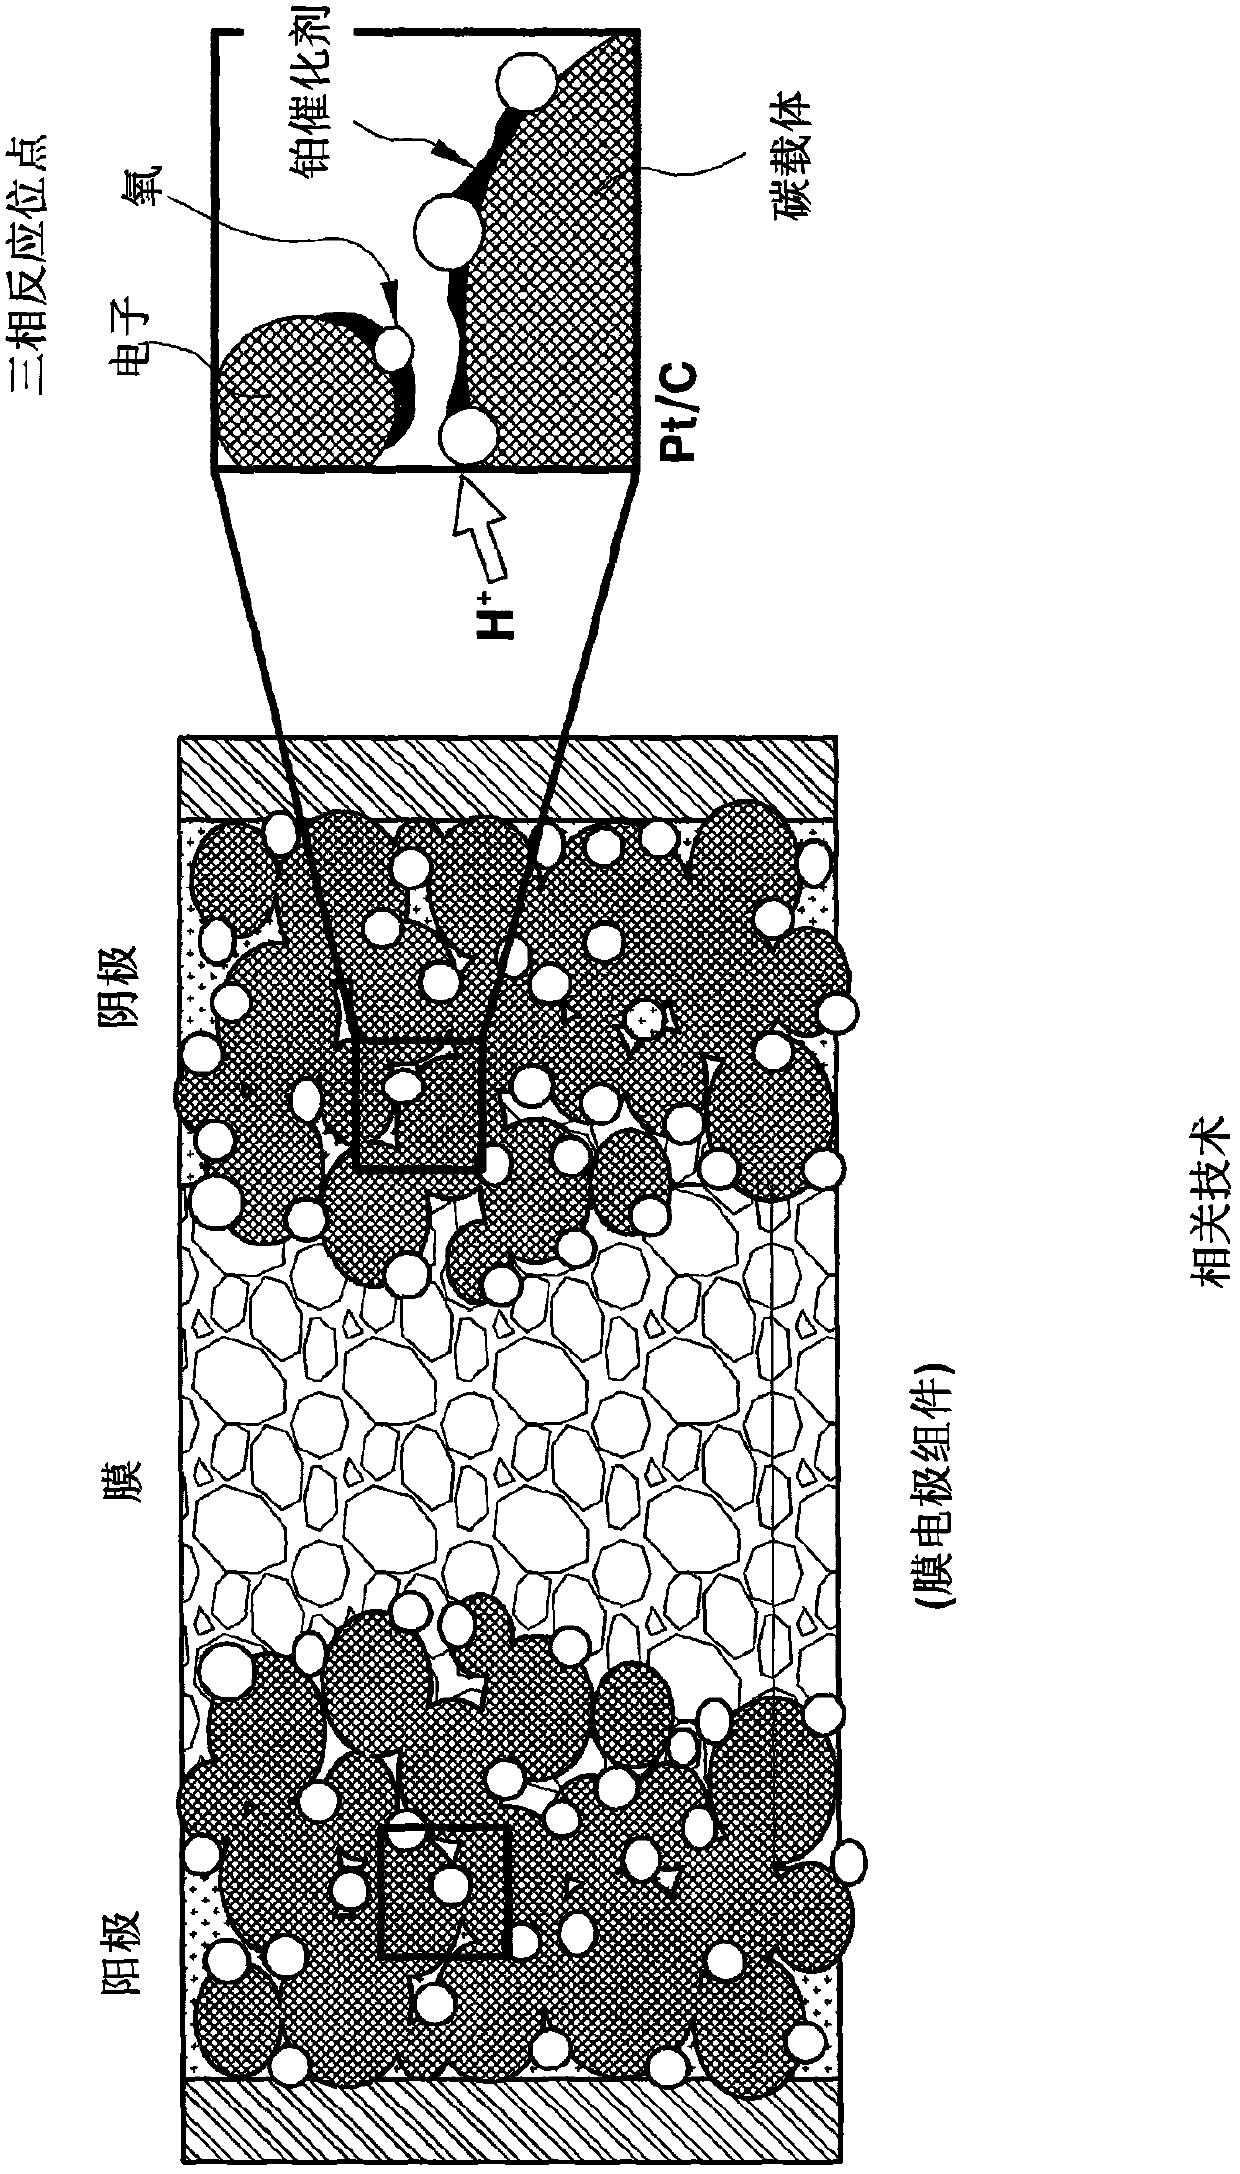 Performance recovery method for fuel cell stacks